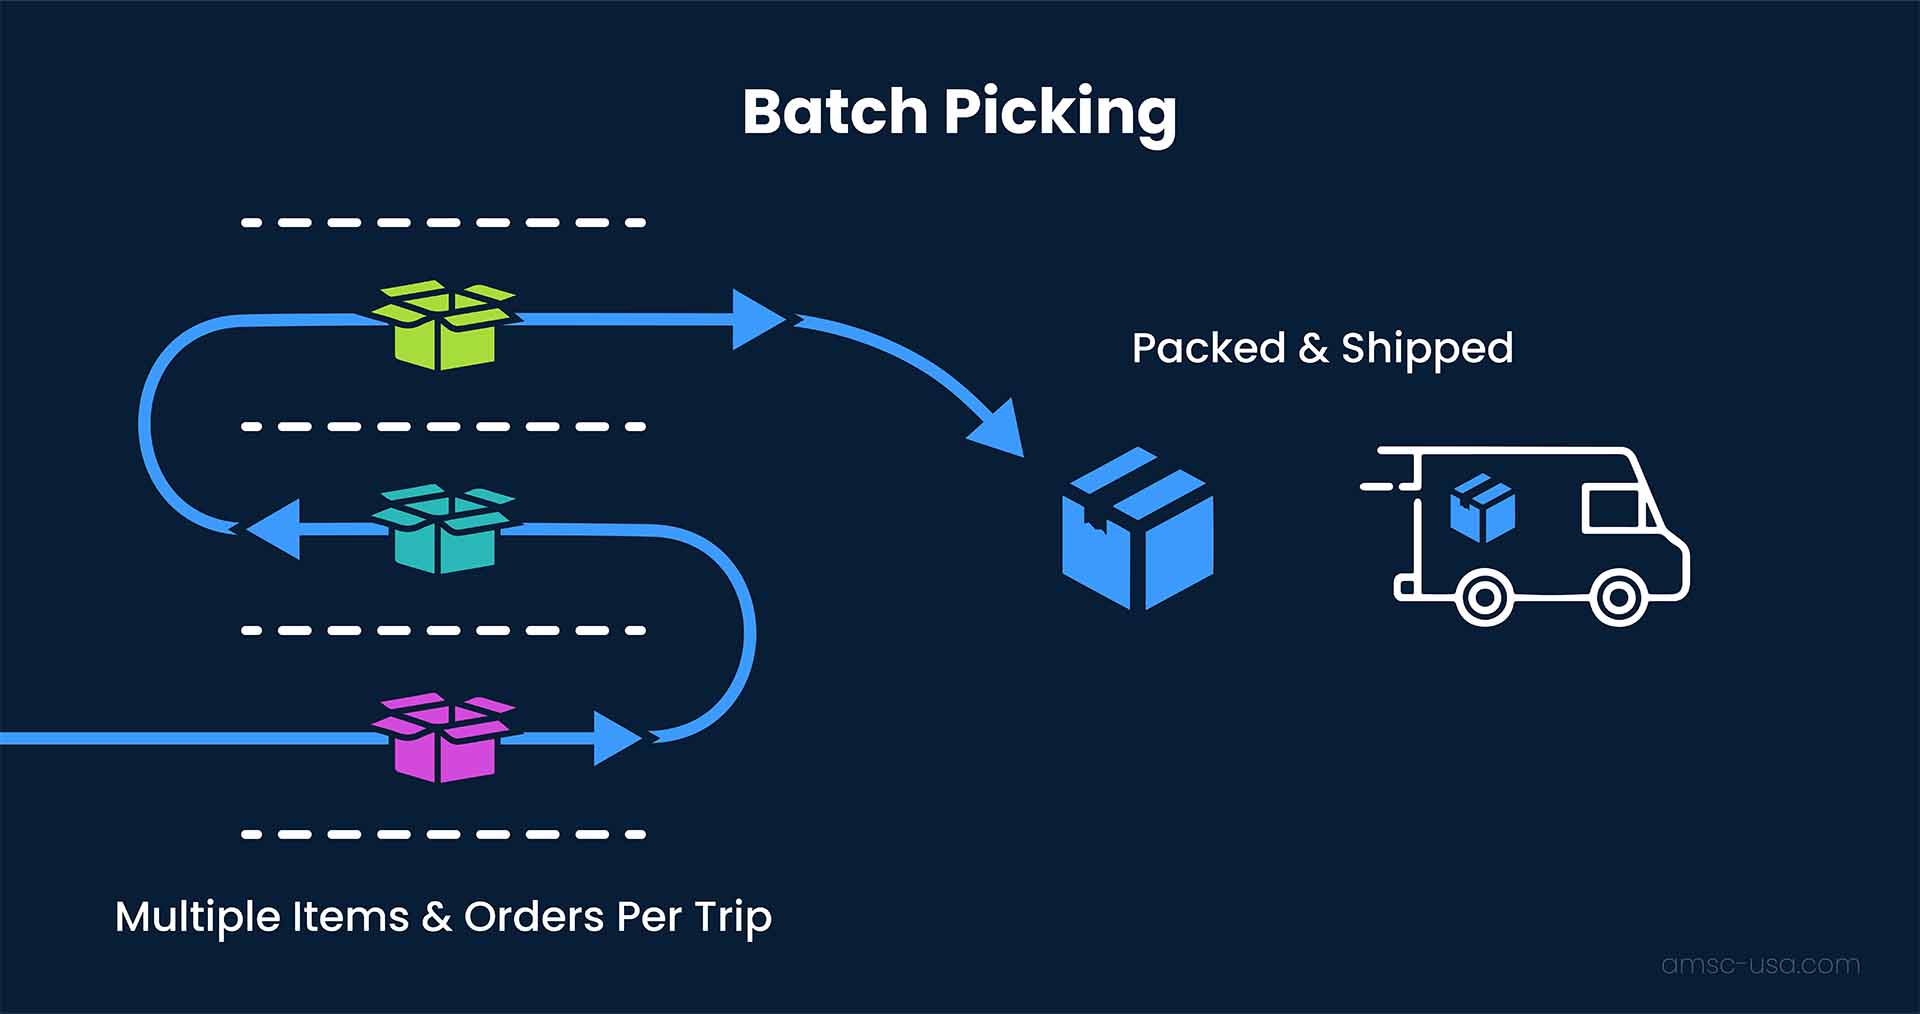 A graphic illustrating the batch picking process.